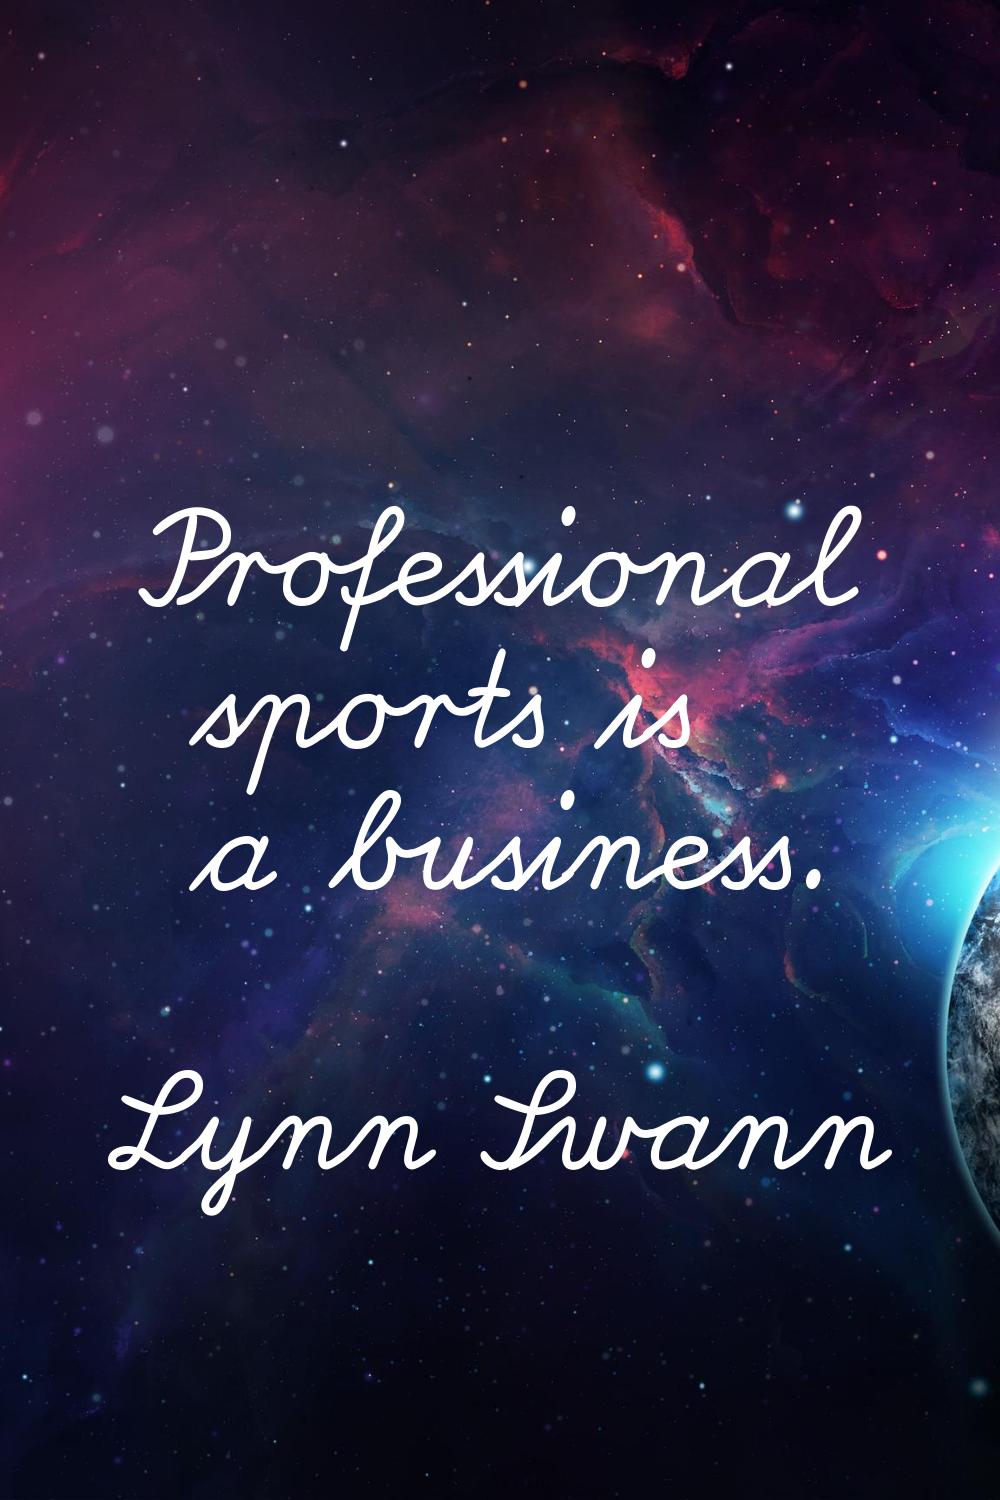 Professional sports is a business.